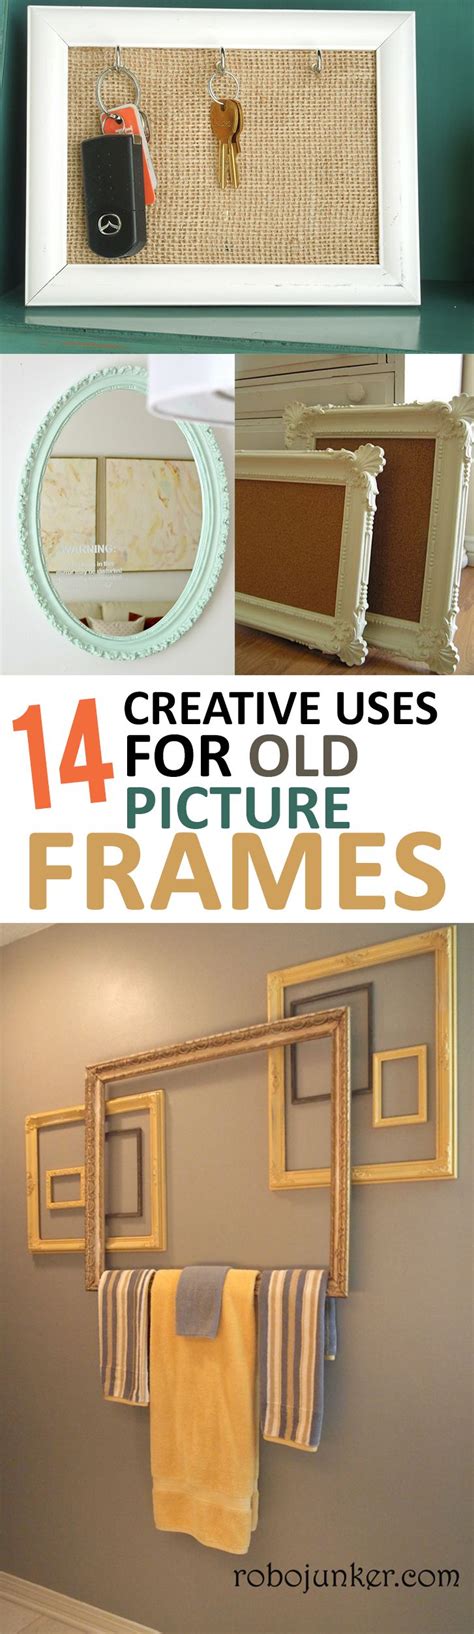 16 diy picture frames try your hand at these beautiful do it yourself picture frames that will add… 14 Creative Uses for Old Picture Frames | Old picture frames, Home diy, Frame crafts